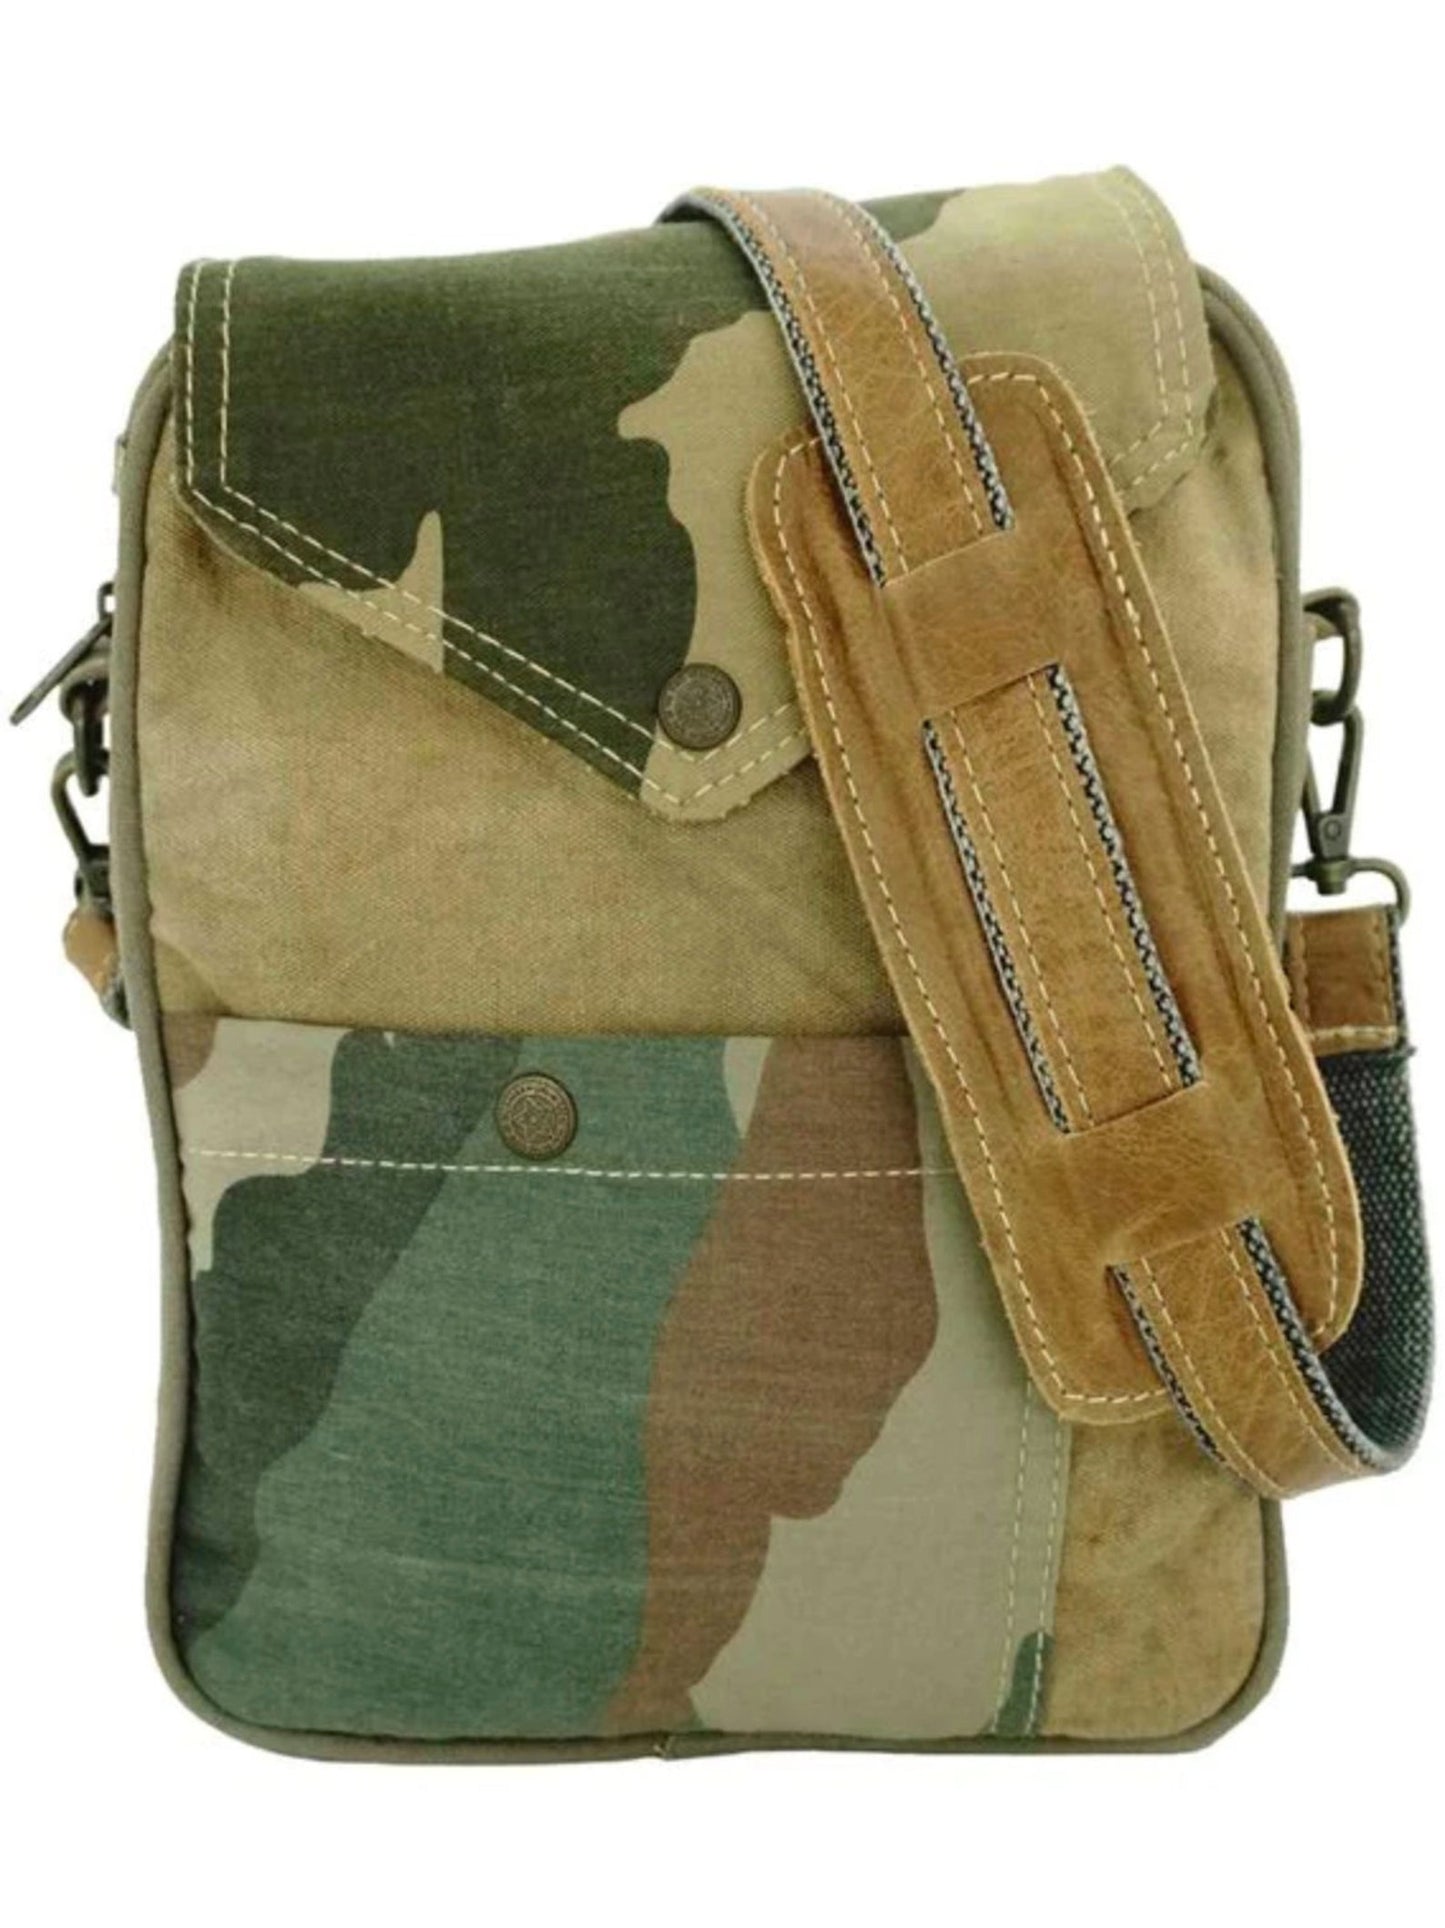 Crossbody Bag | Recycled Military Tent Camouflage